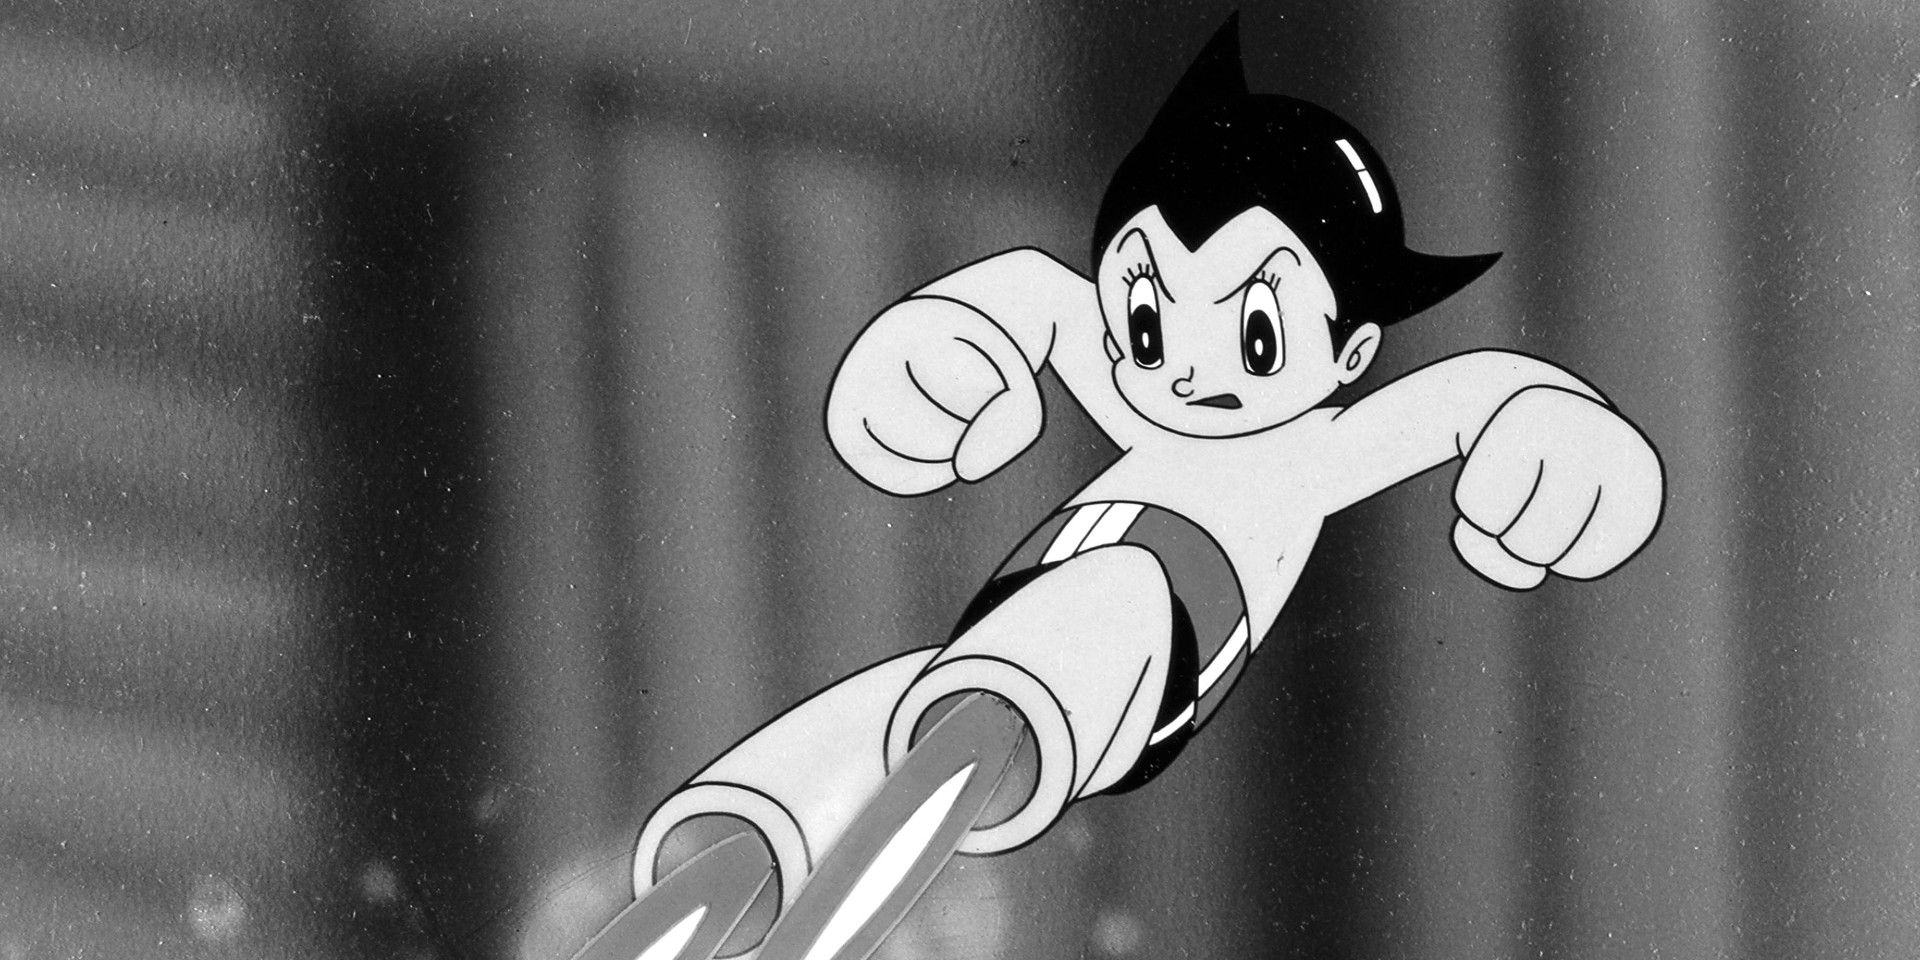 Astro boy hi-res stock photography and images - Alamy